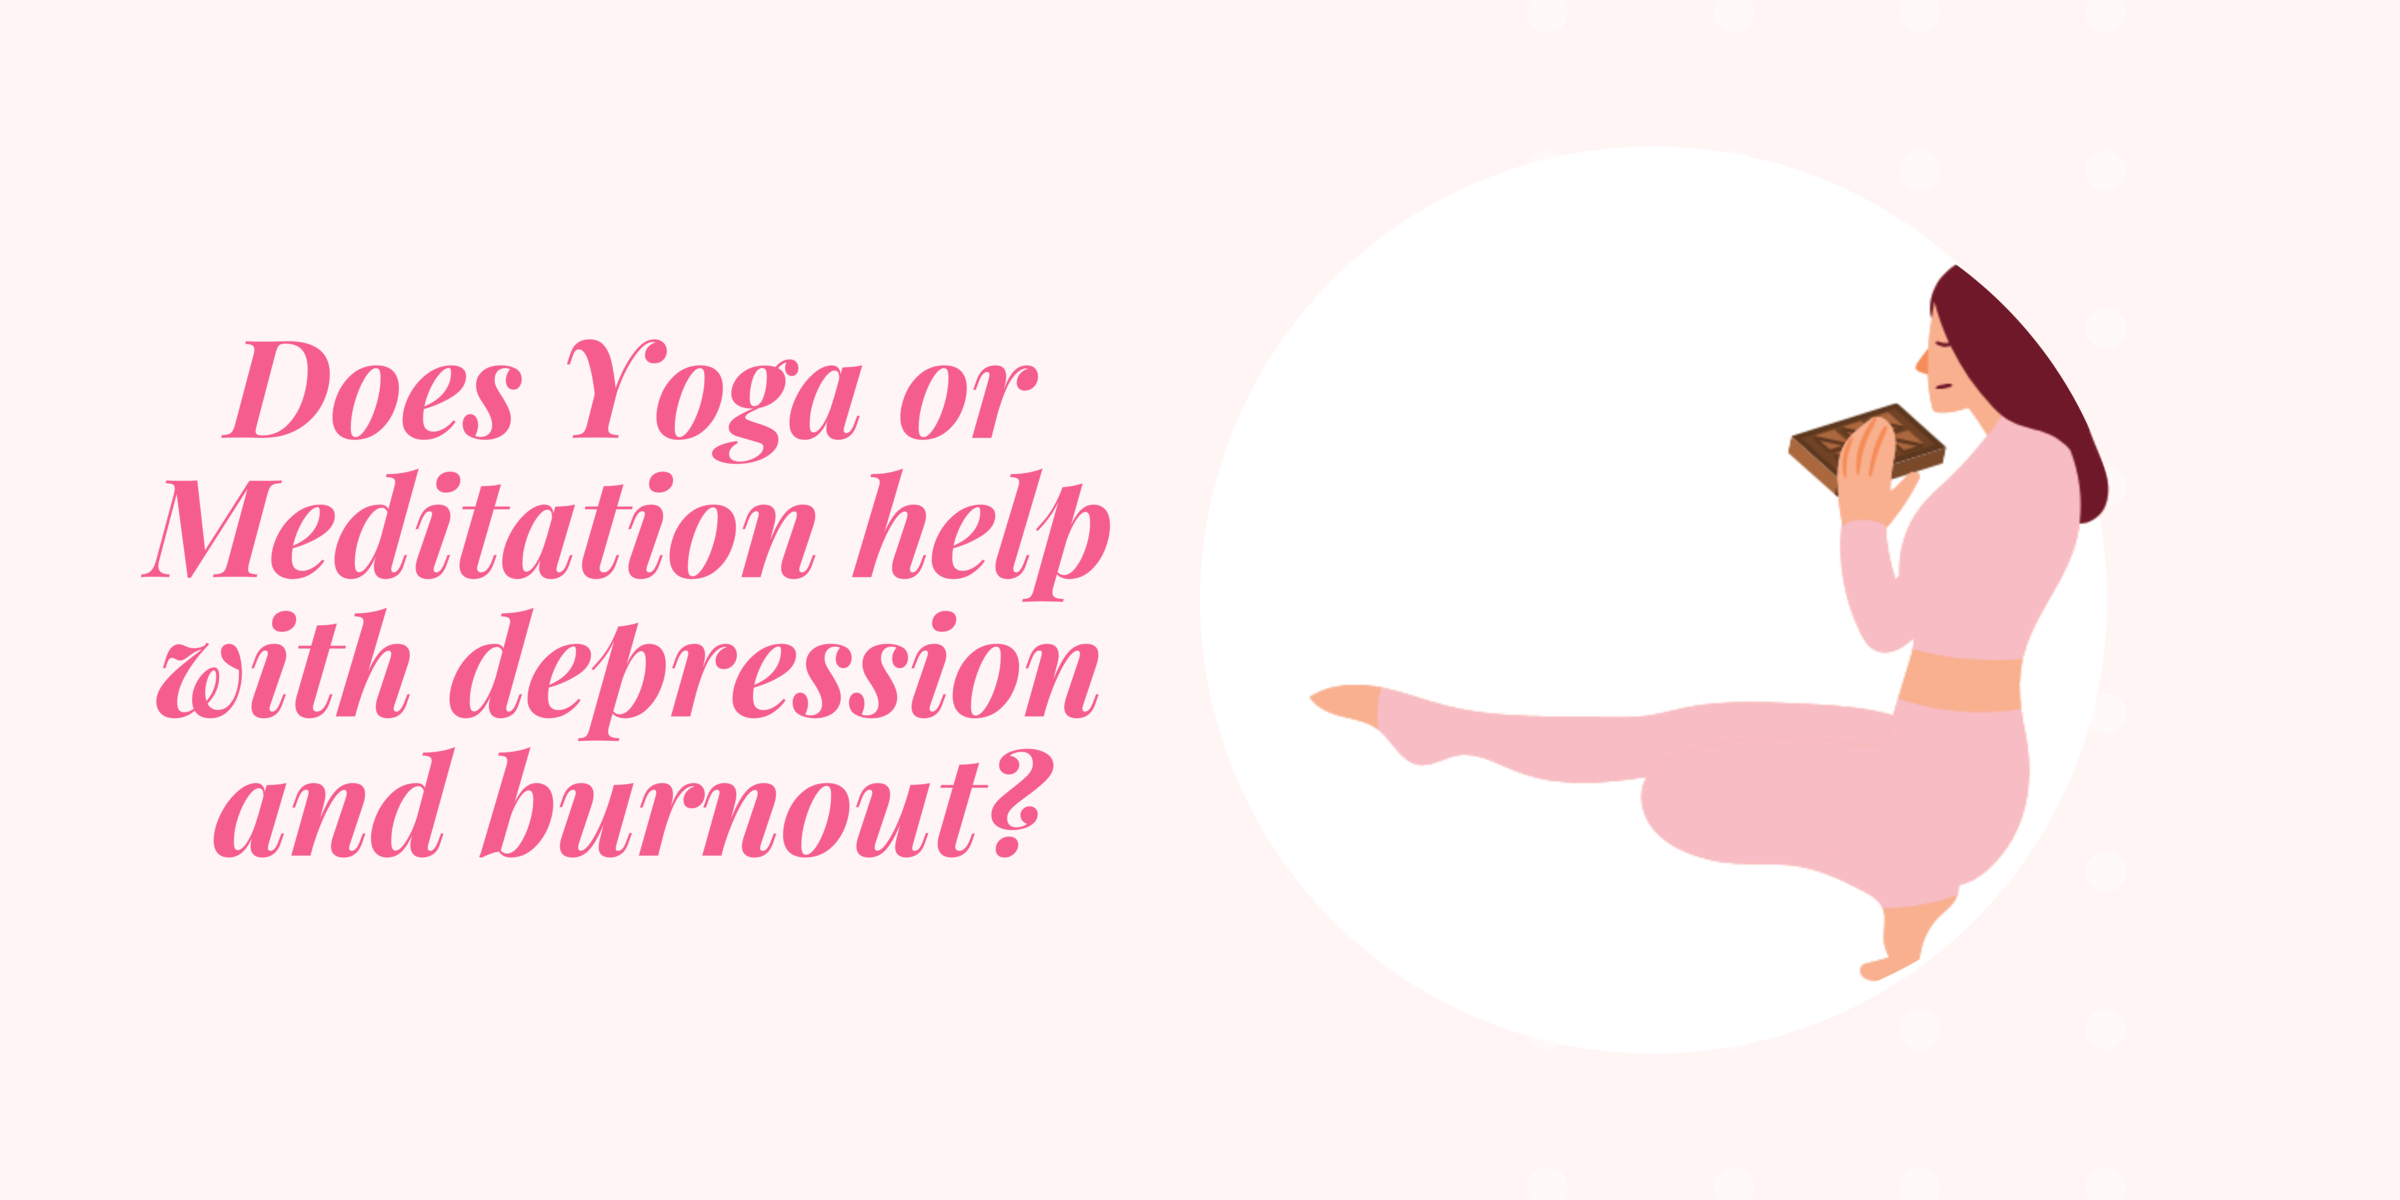 Does yoga help with depression and burnout